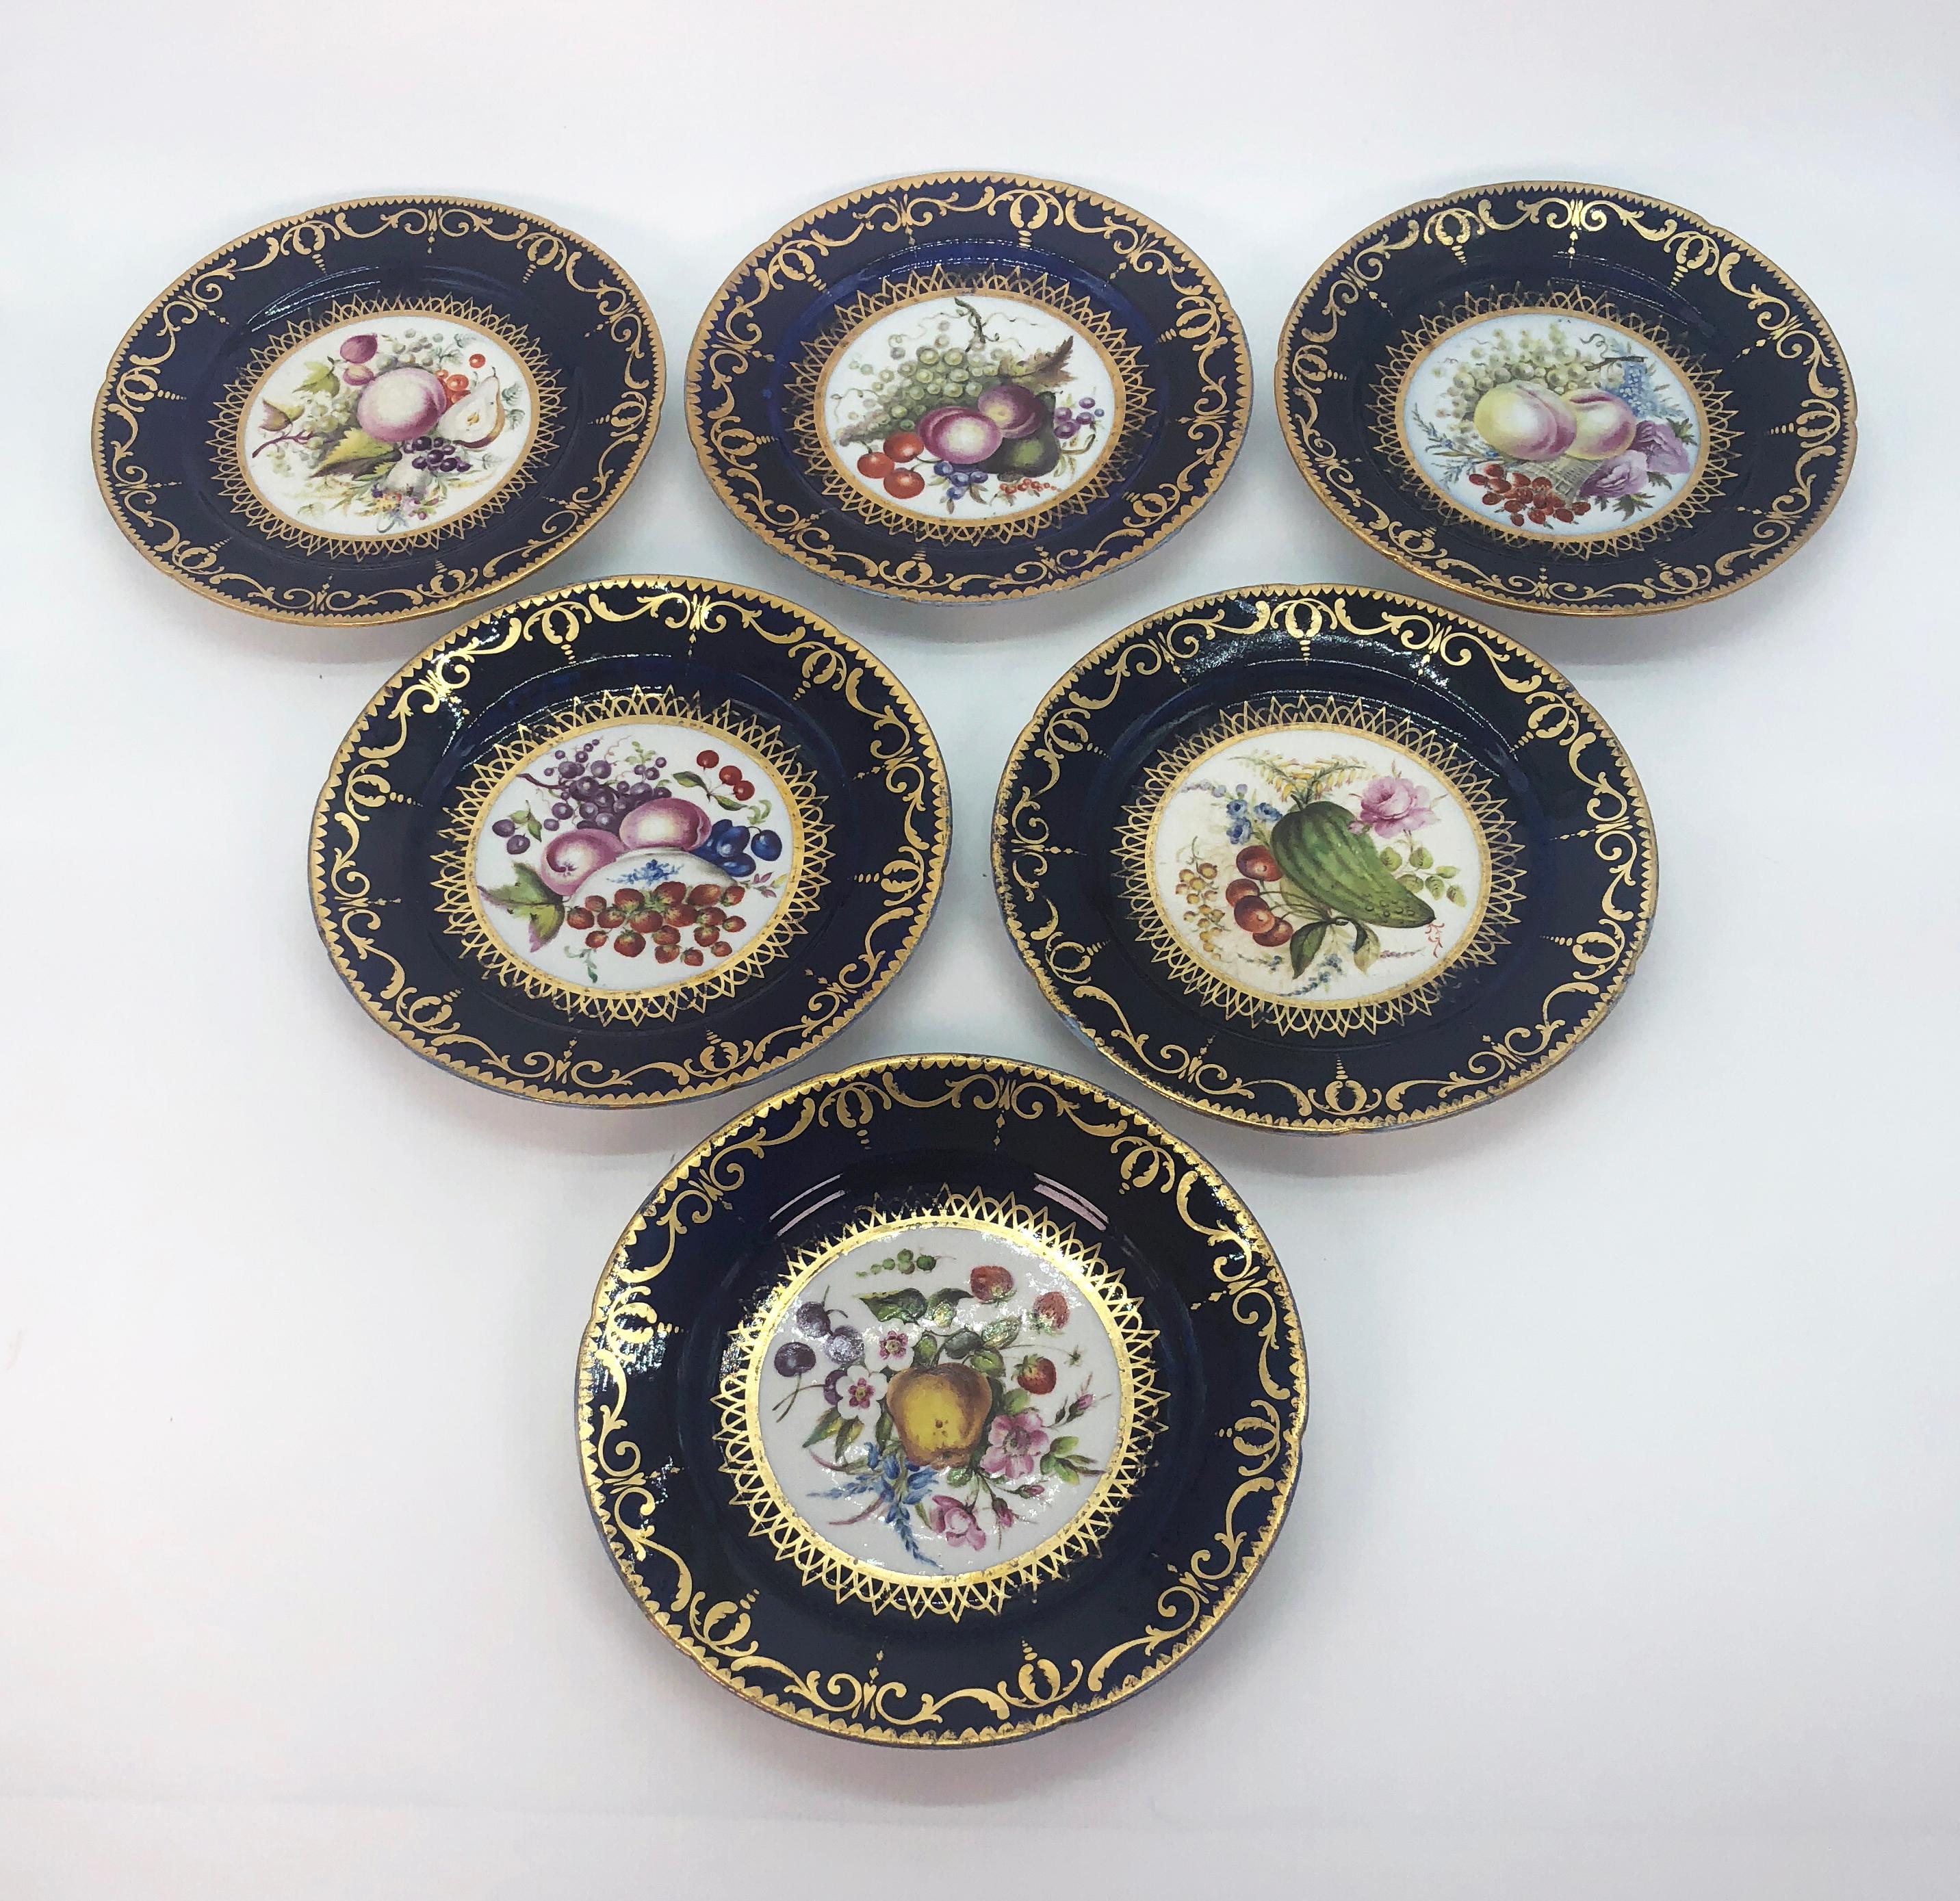 Six Regency side plates by Coalport with hand painted panels of fruit, circa 1805. Cobalt borders support a gilded band of interlocking scrolls and finials with a gold dentil border. Hand painted panels of fruit and flora in the manner of the